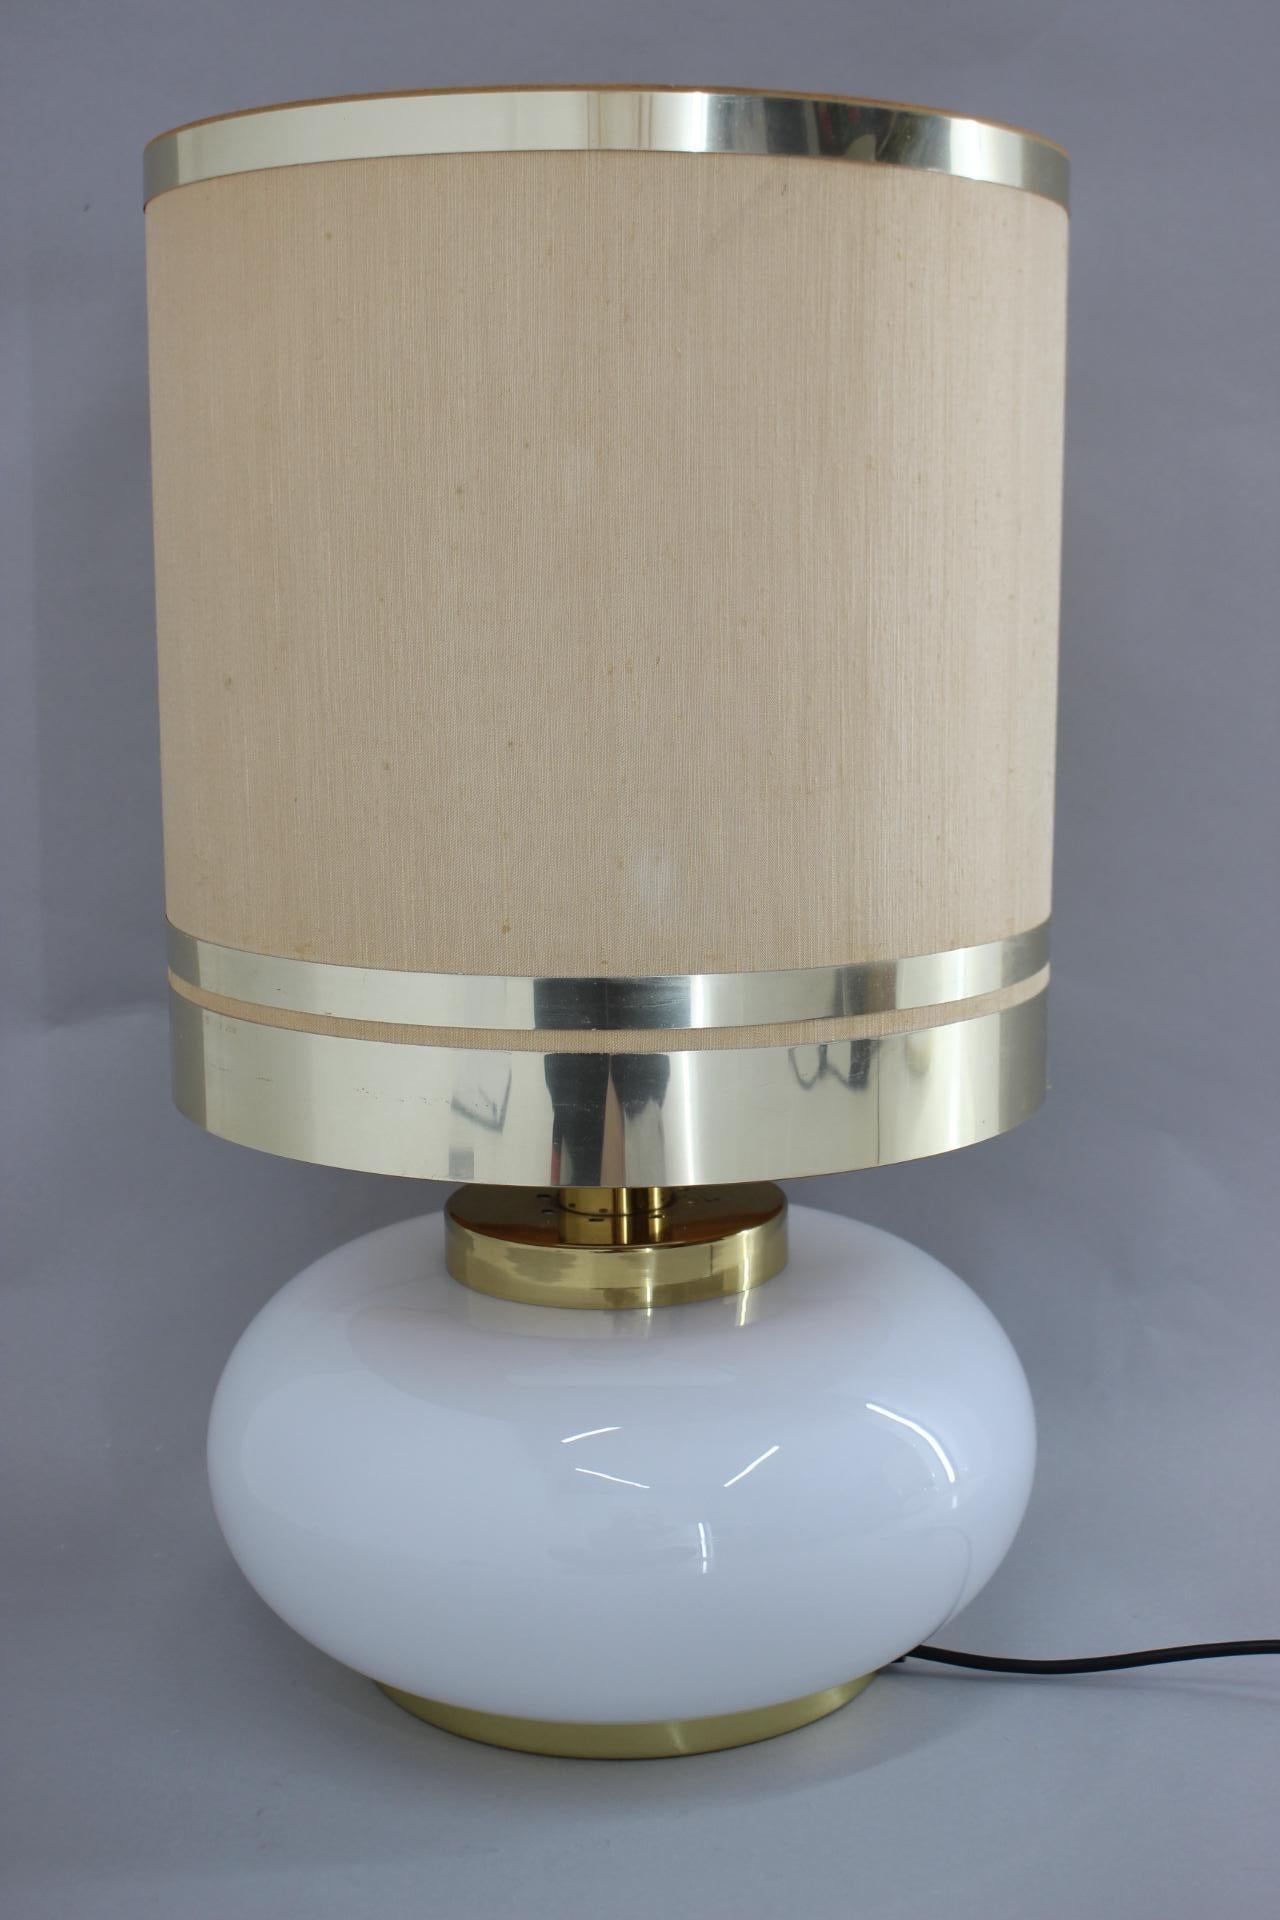 - base part made of glass and brass
- fabric and brass lamp shade 
- 3 modes of light
- Fabric lamp shade with minor signs of use.